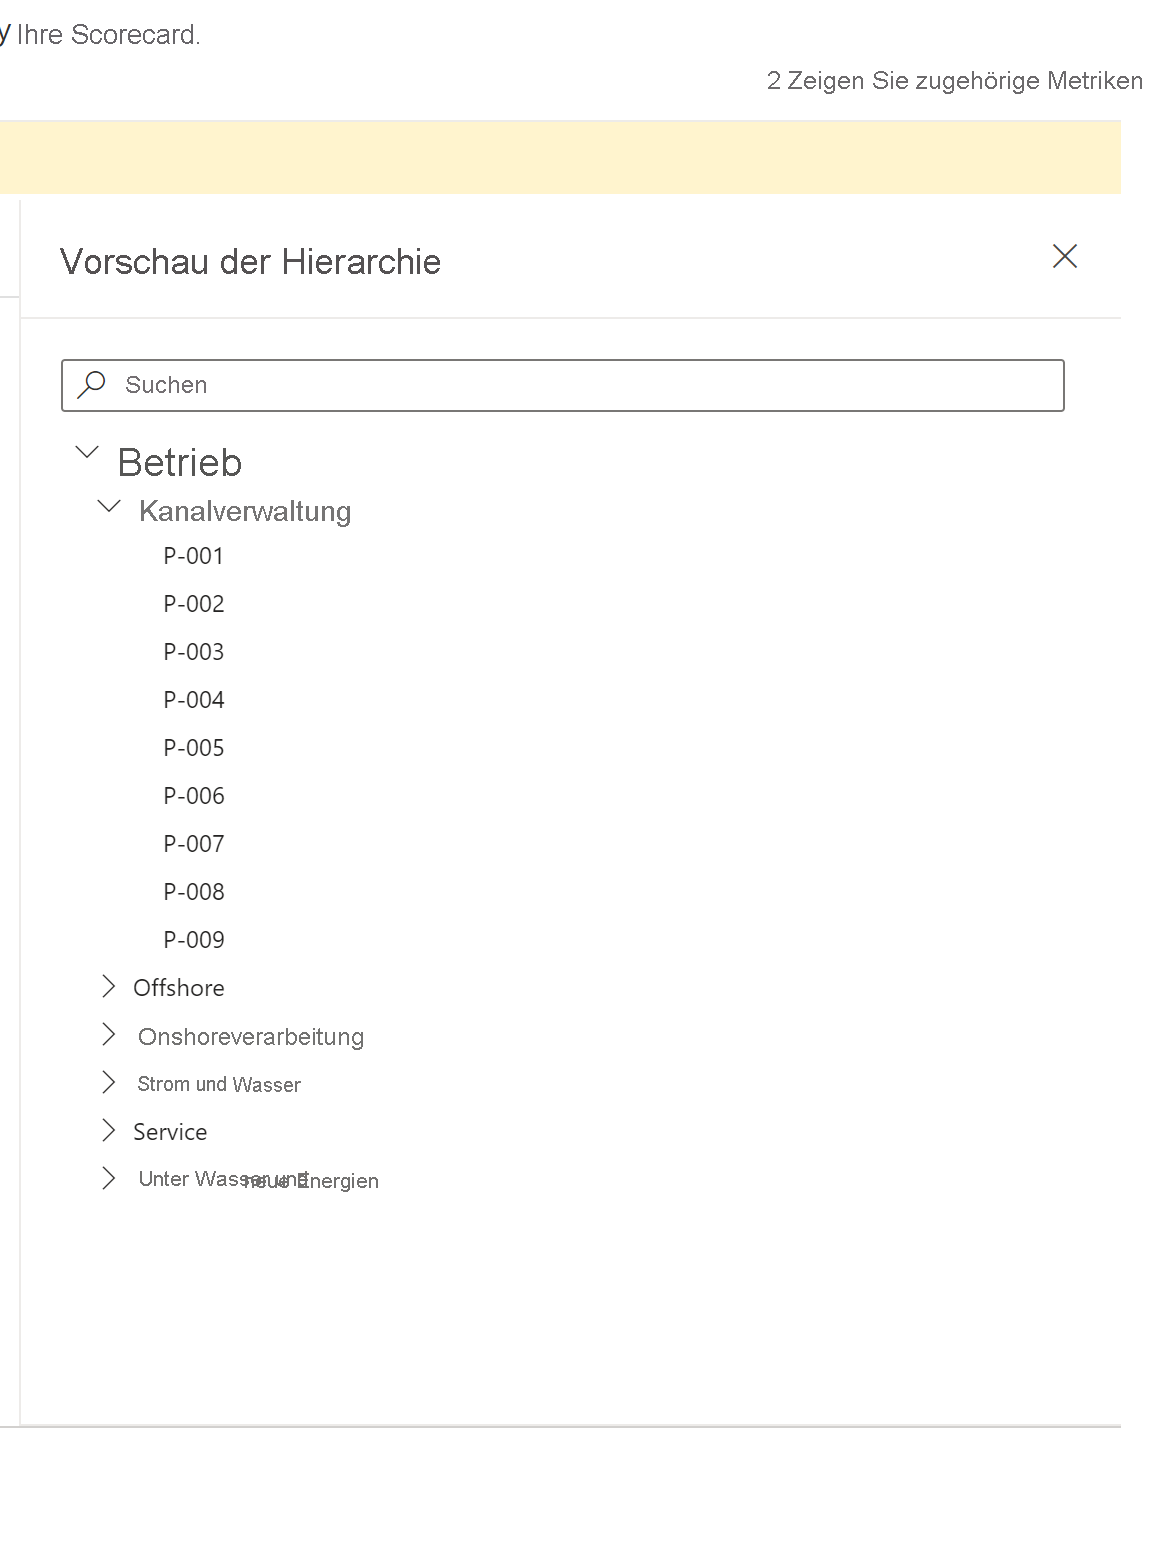 Screenshot of the hierarchy preview pane showing the hierarchy tree.